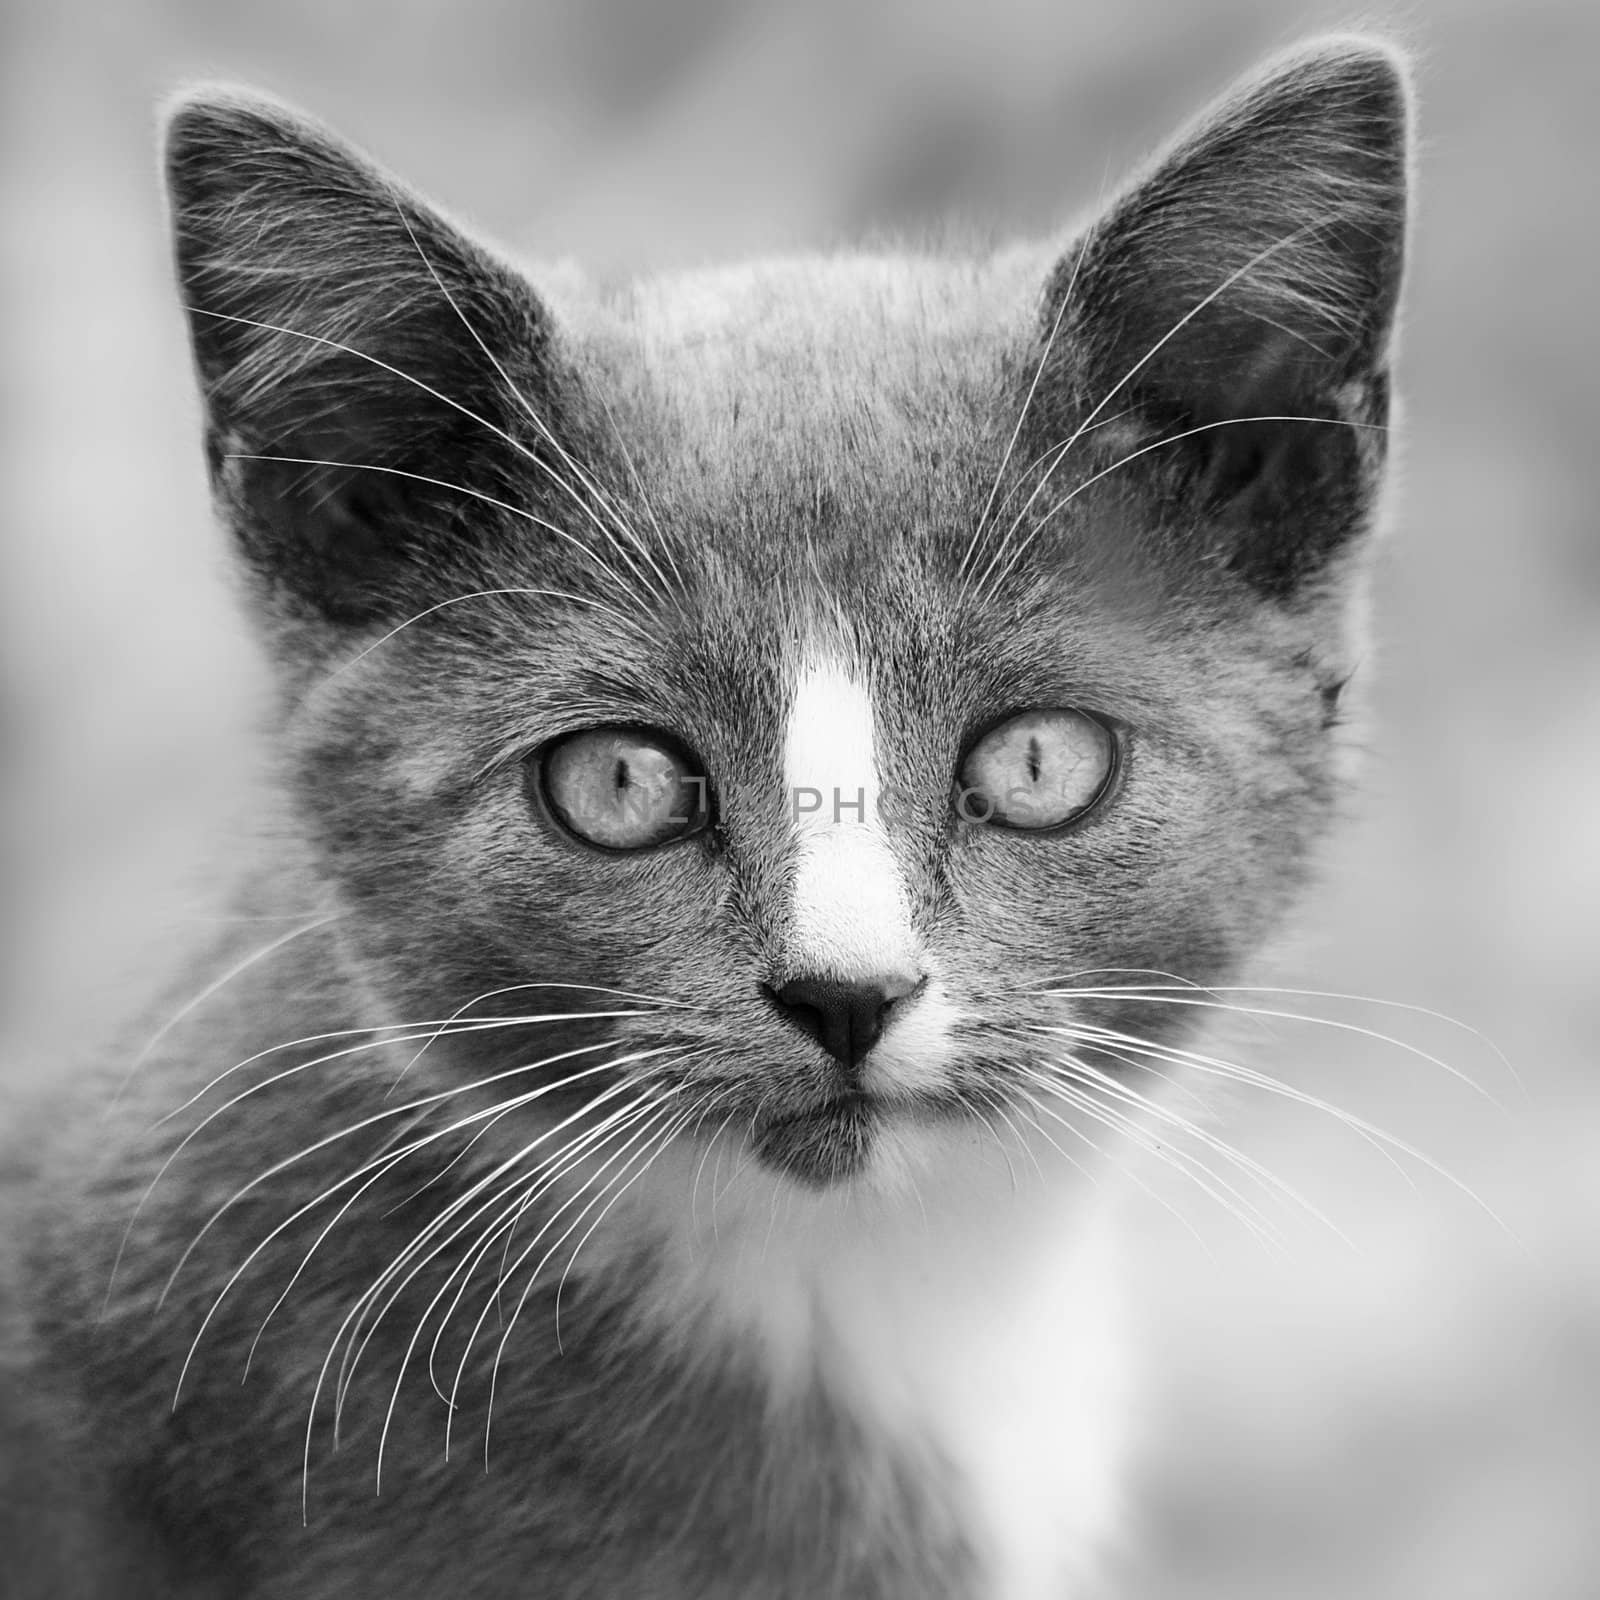 A black and white image of a kitten.